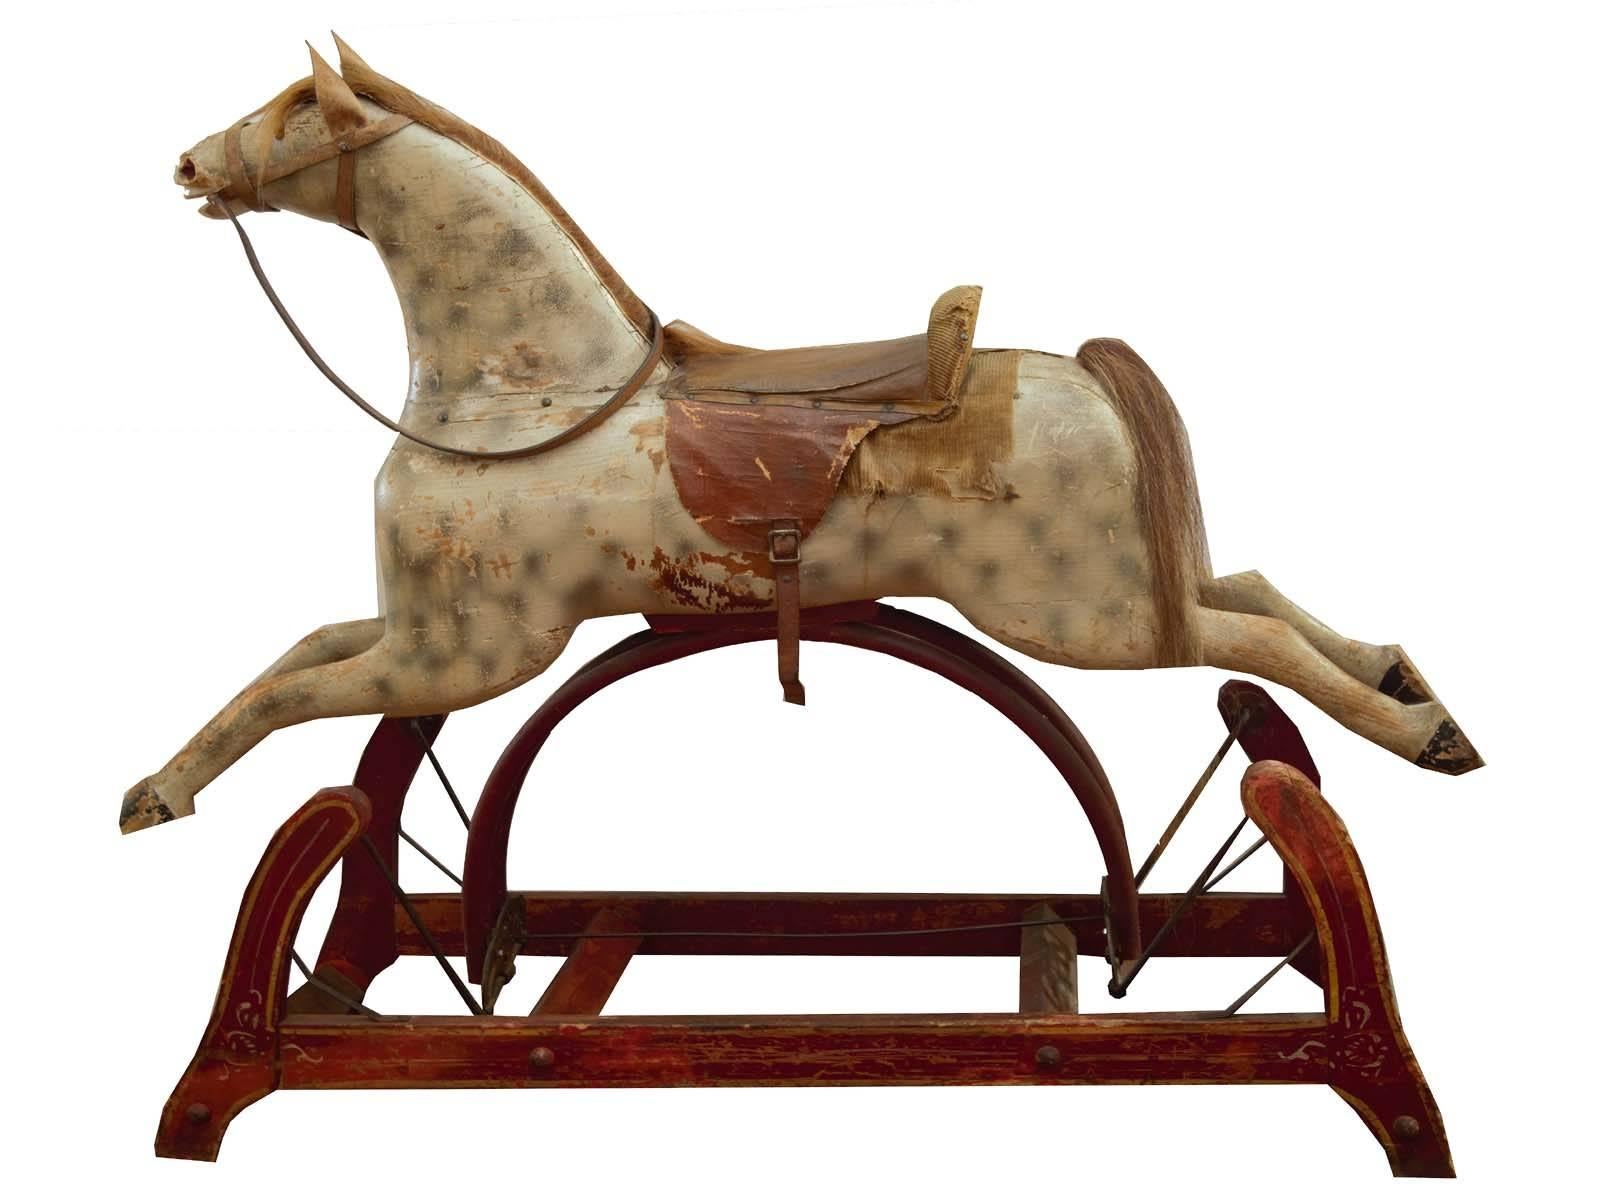 Early rocking horse, solid carved wood and original horse hair mane and tail. beautiful patina and a classic Americana style and look.